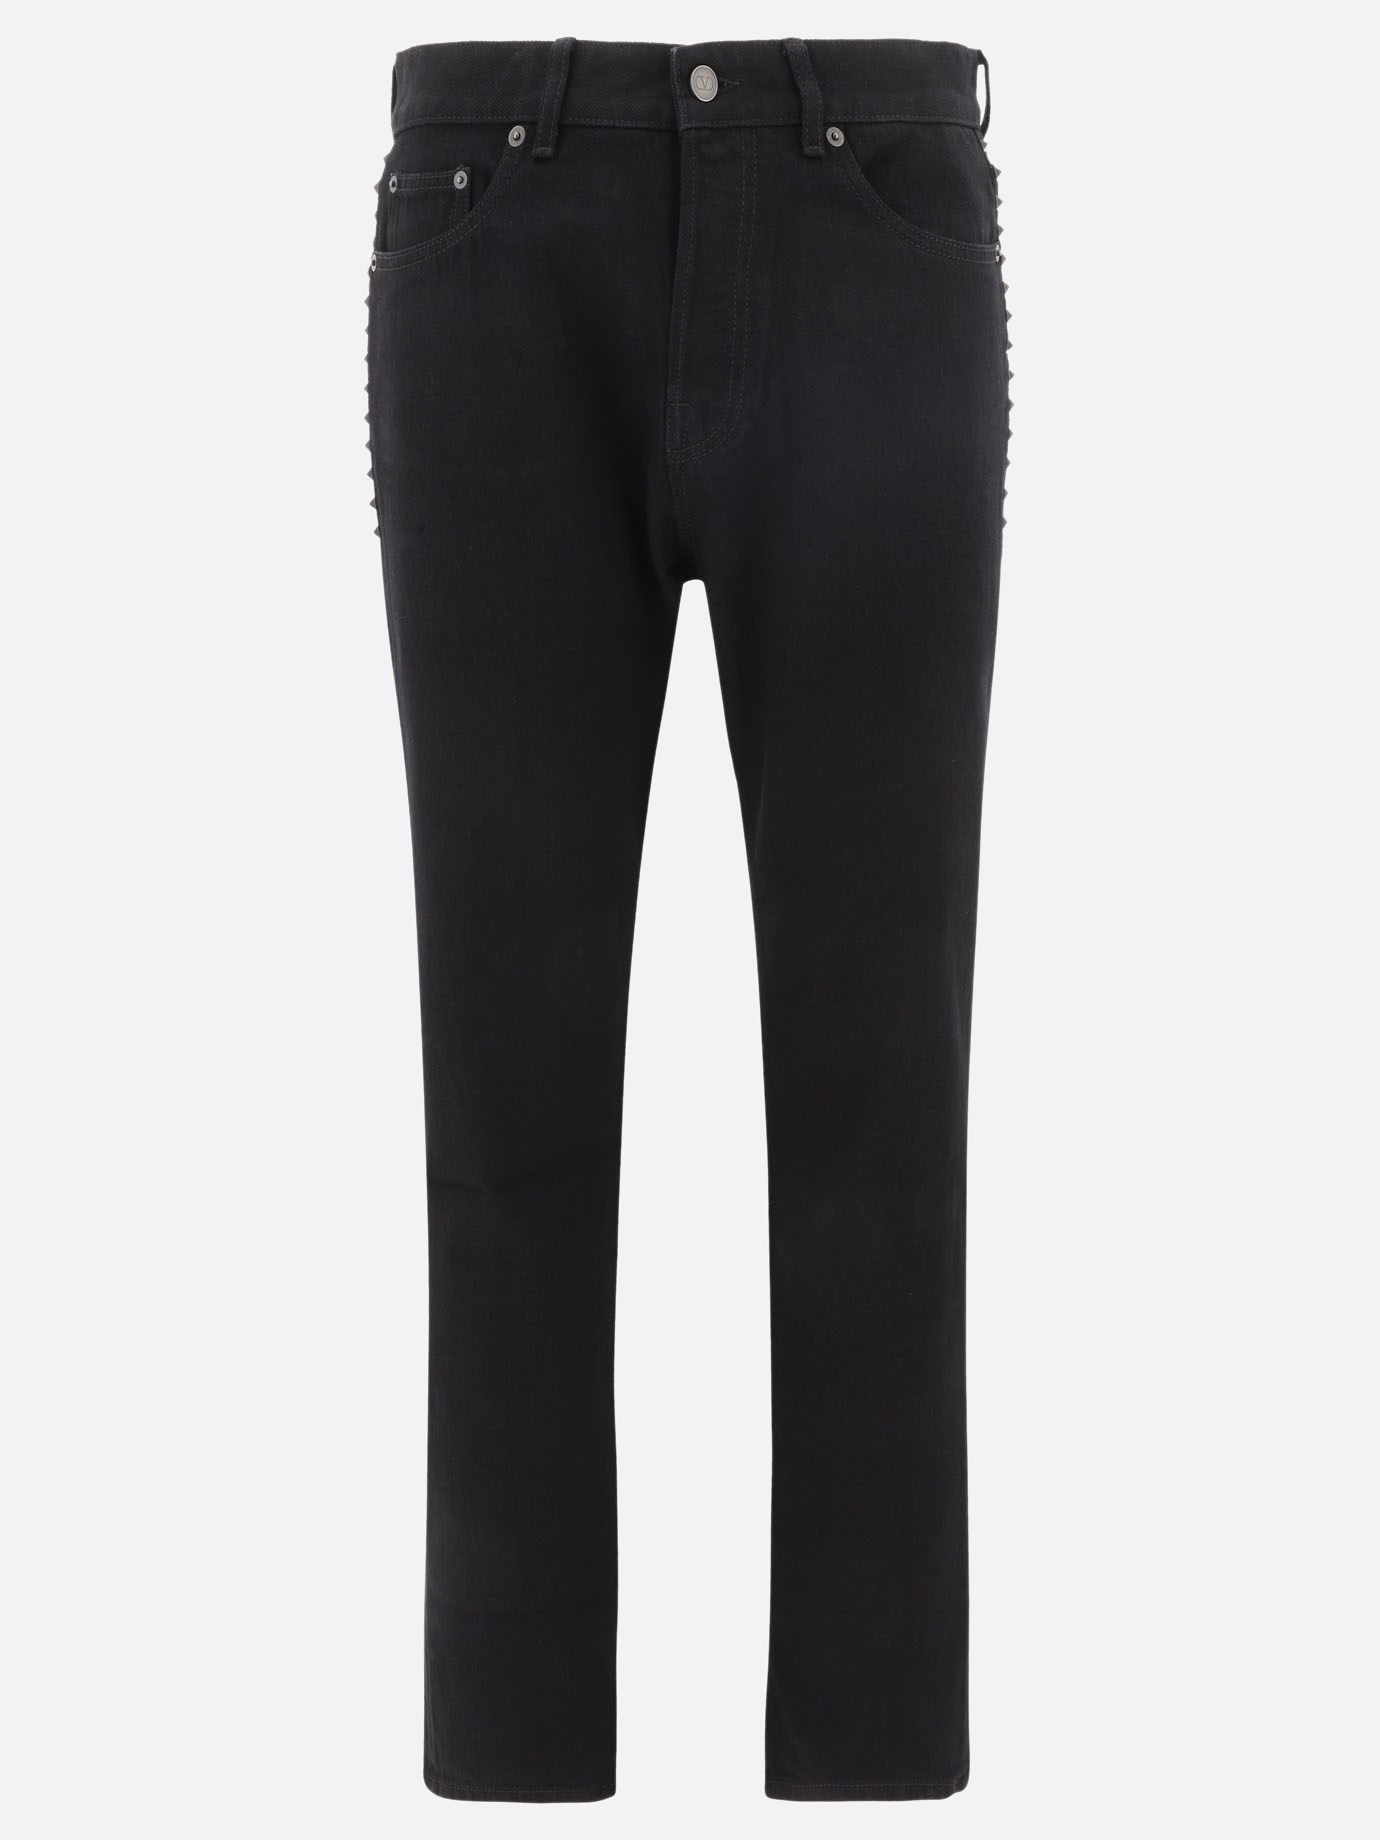 Jeans  Black Untitled by Valentino - 0